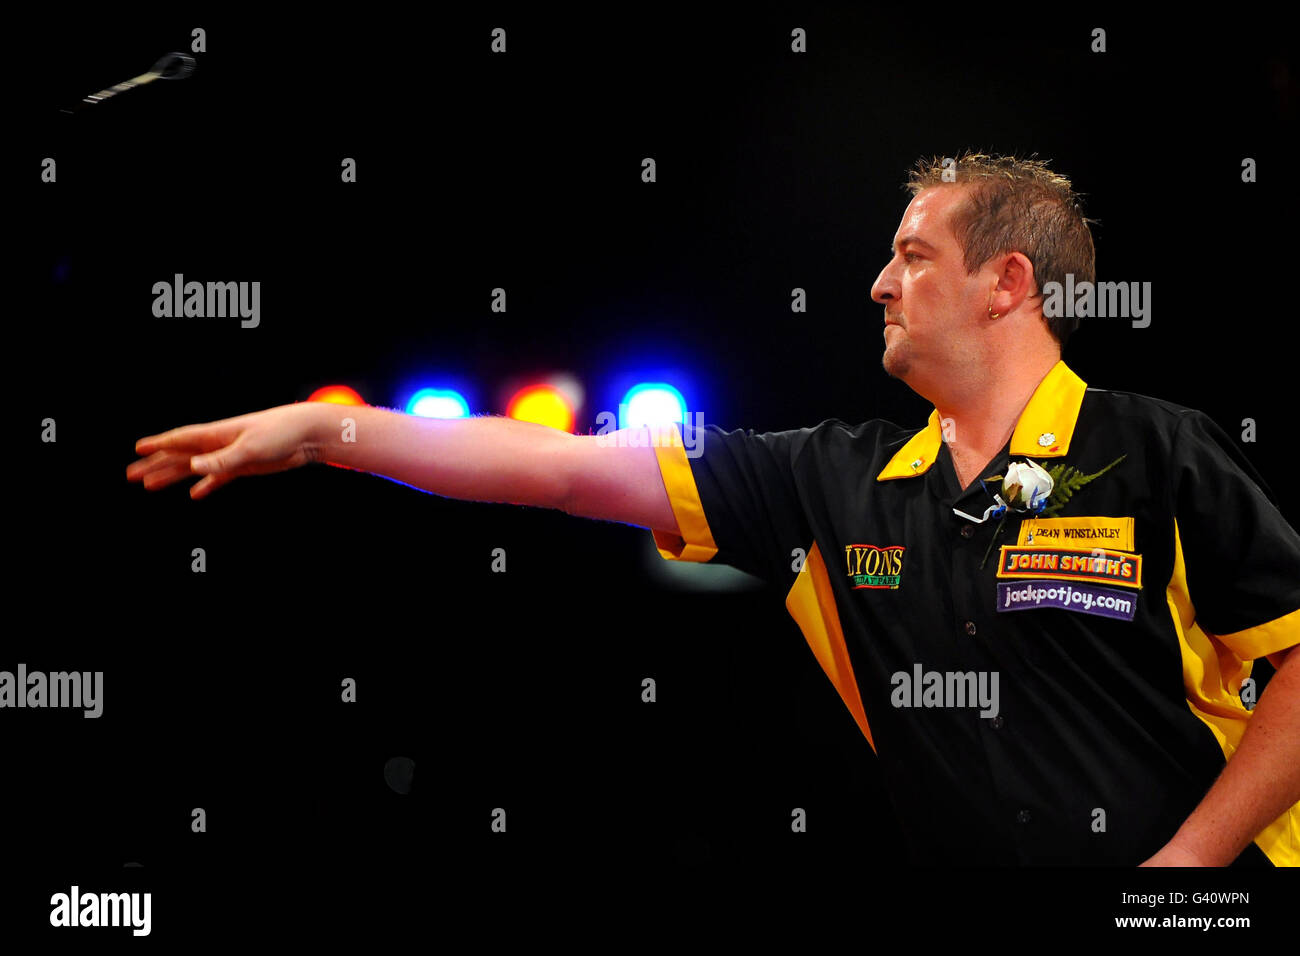 England's Dean Winstanley in action during his final against England's Martin Adams during the BDO World Professional Darts Championship at the Lakeside Complex, Surrey. Stock Photo